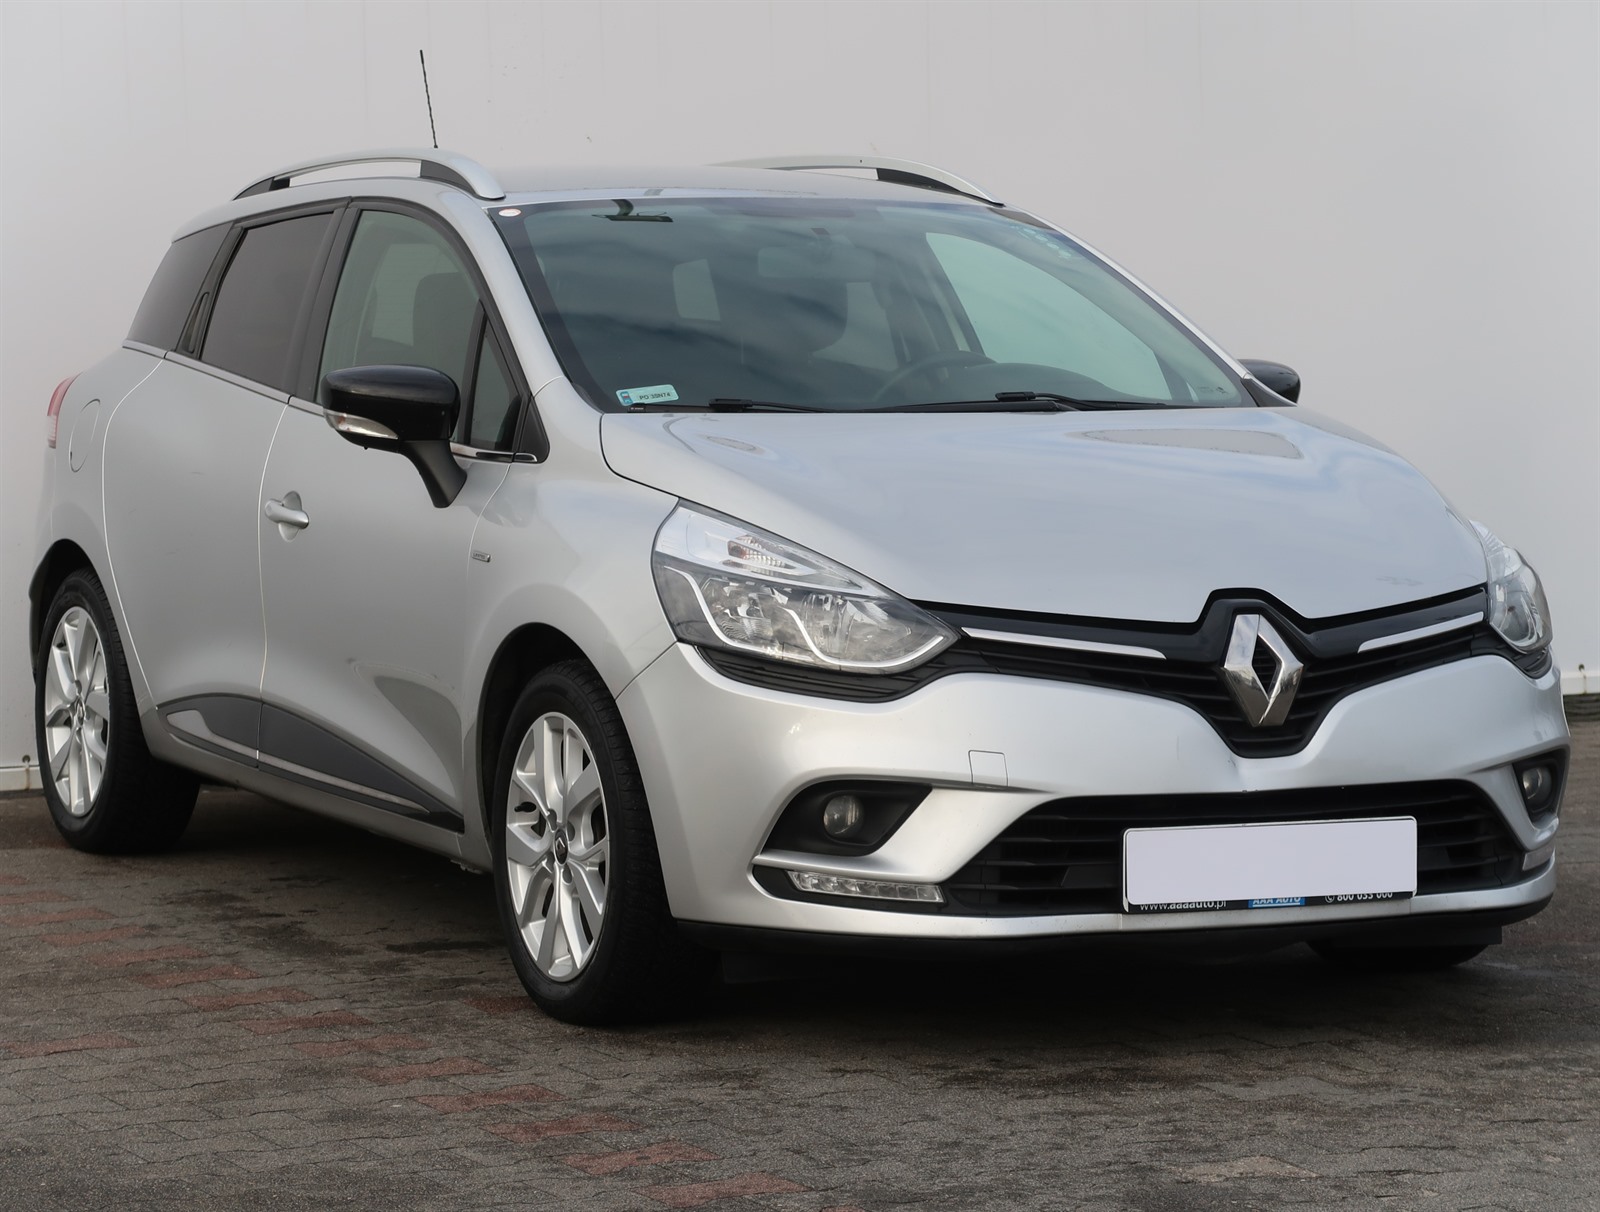 Renault Clio 1.2 TCe Wagon 2018 - 1